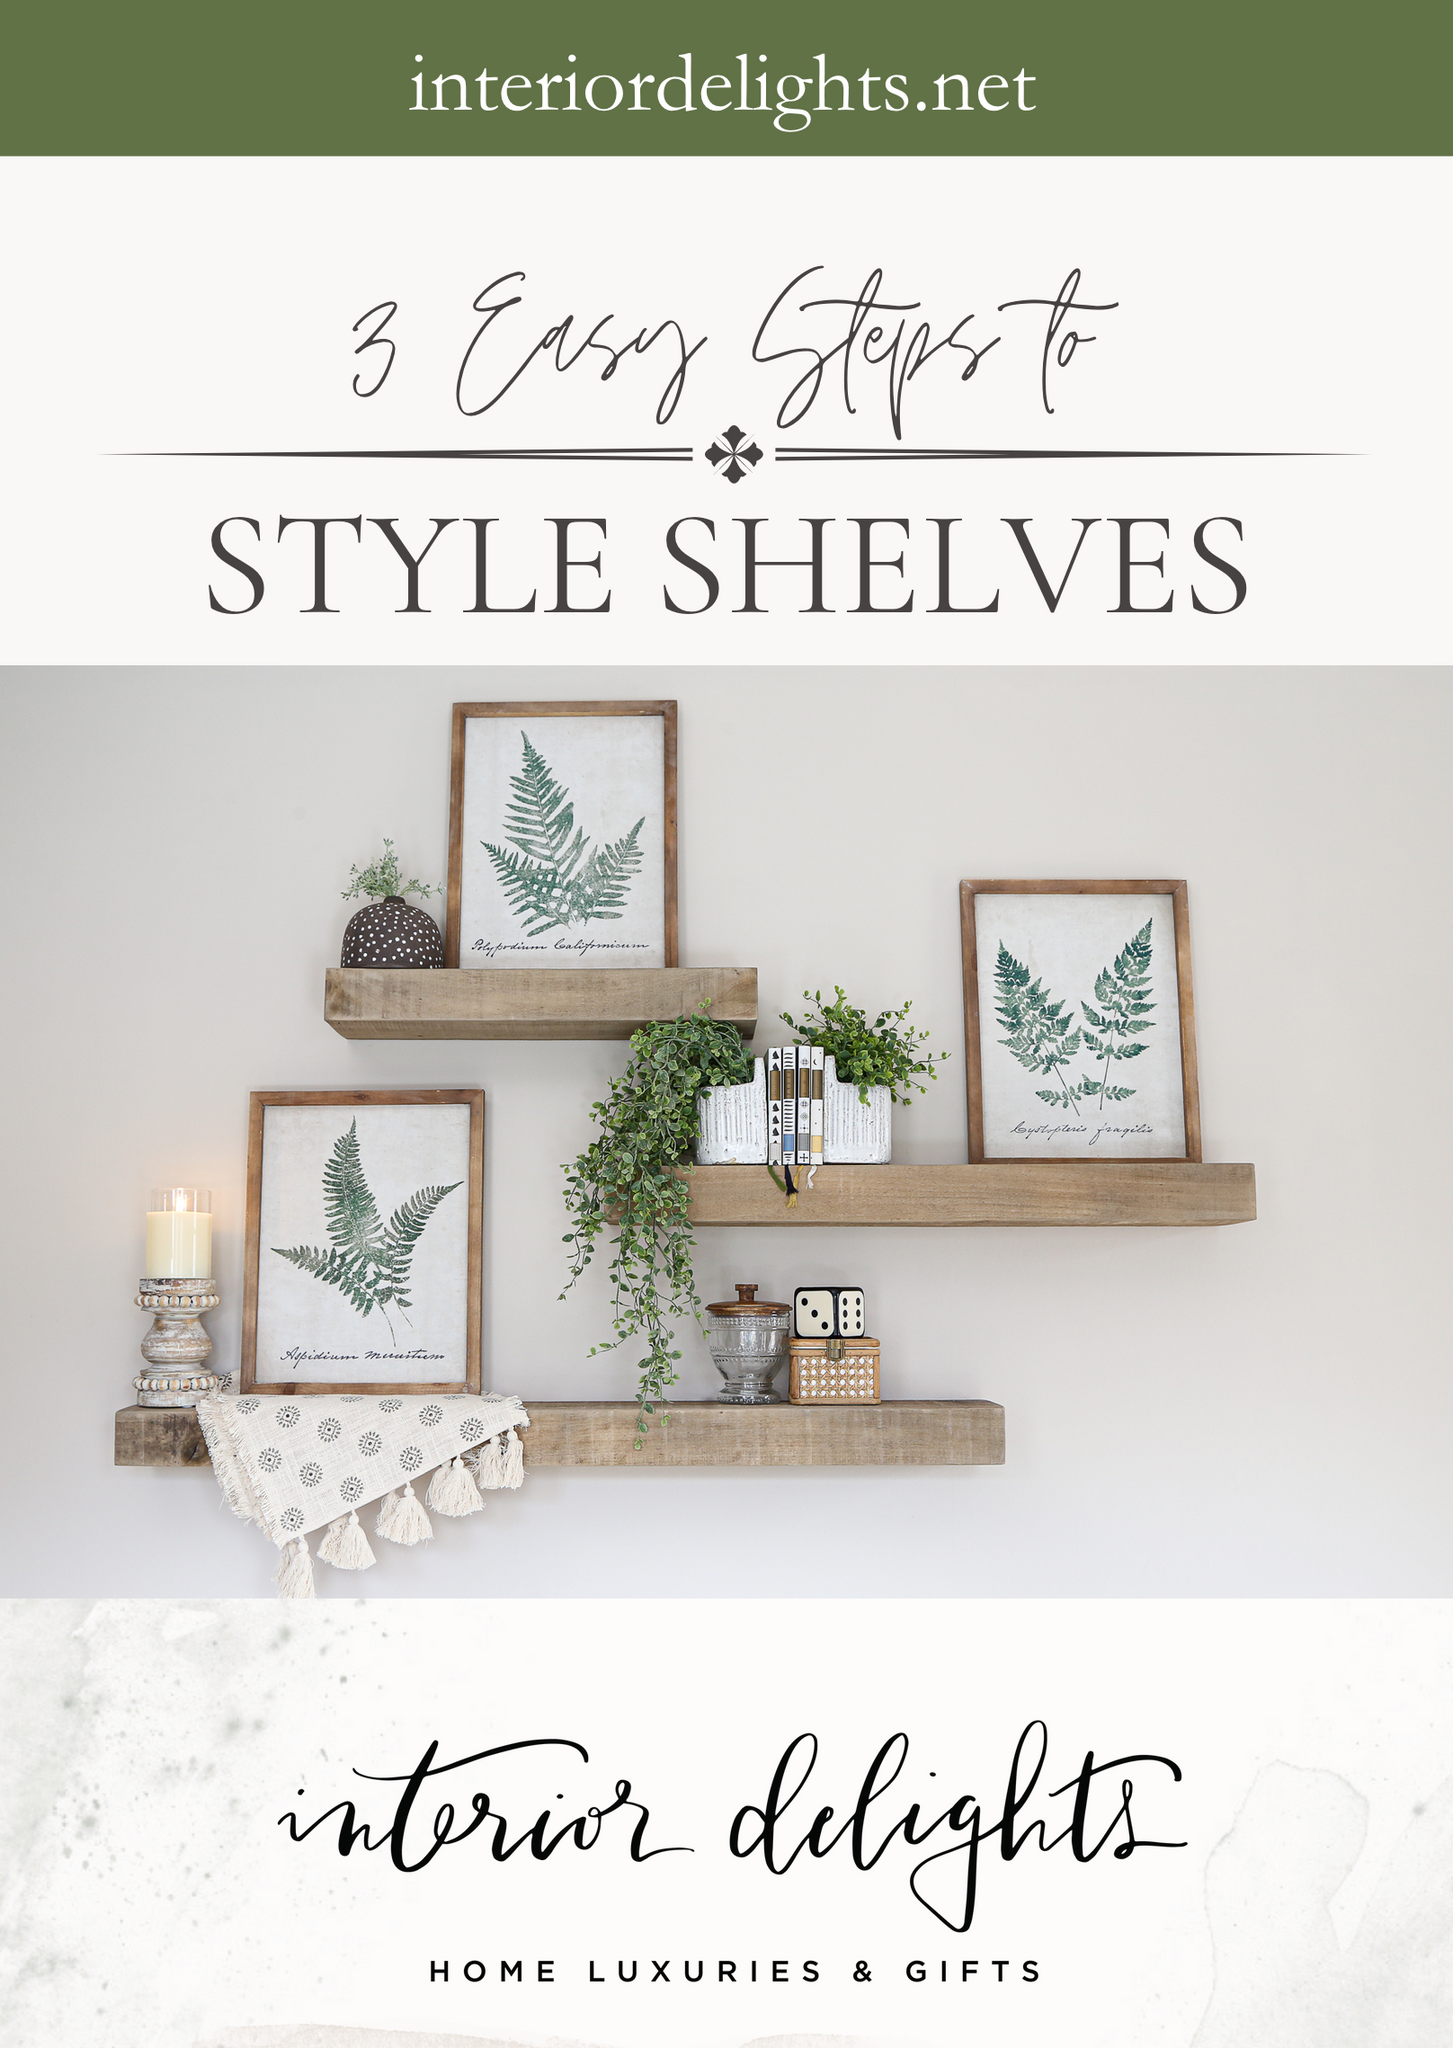 3 Easy steps to style shelves